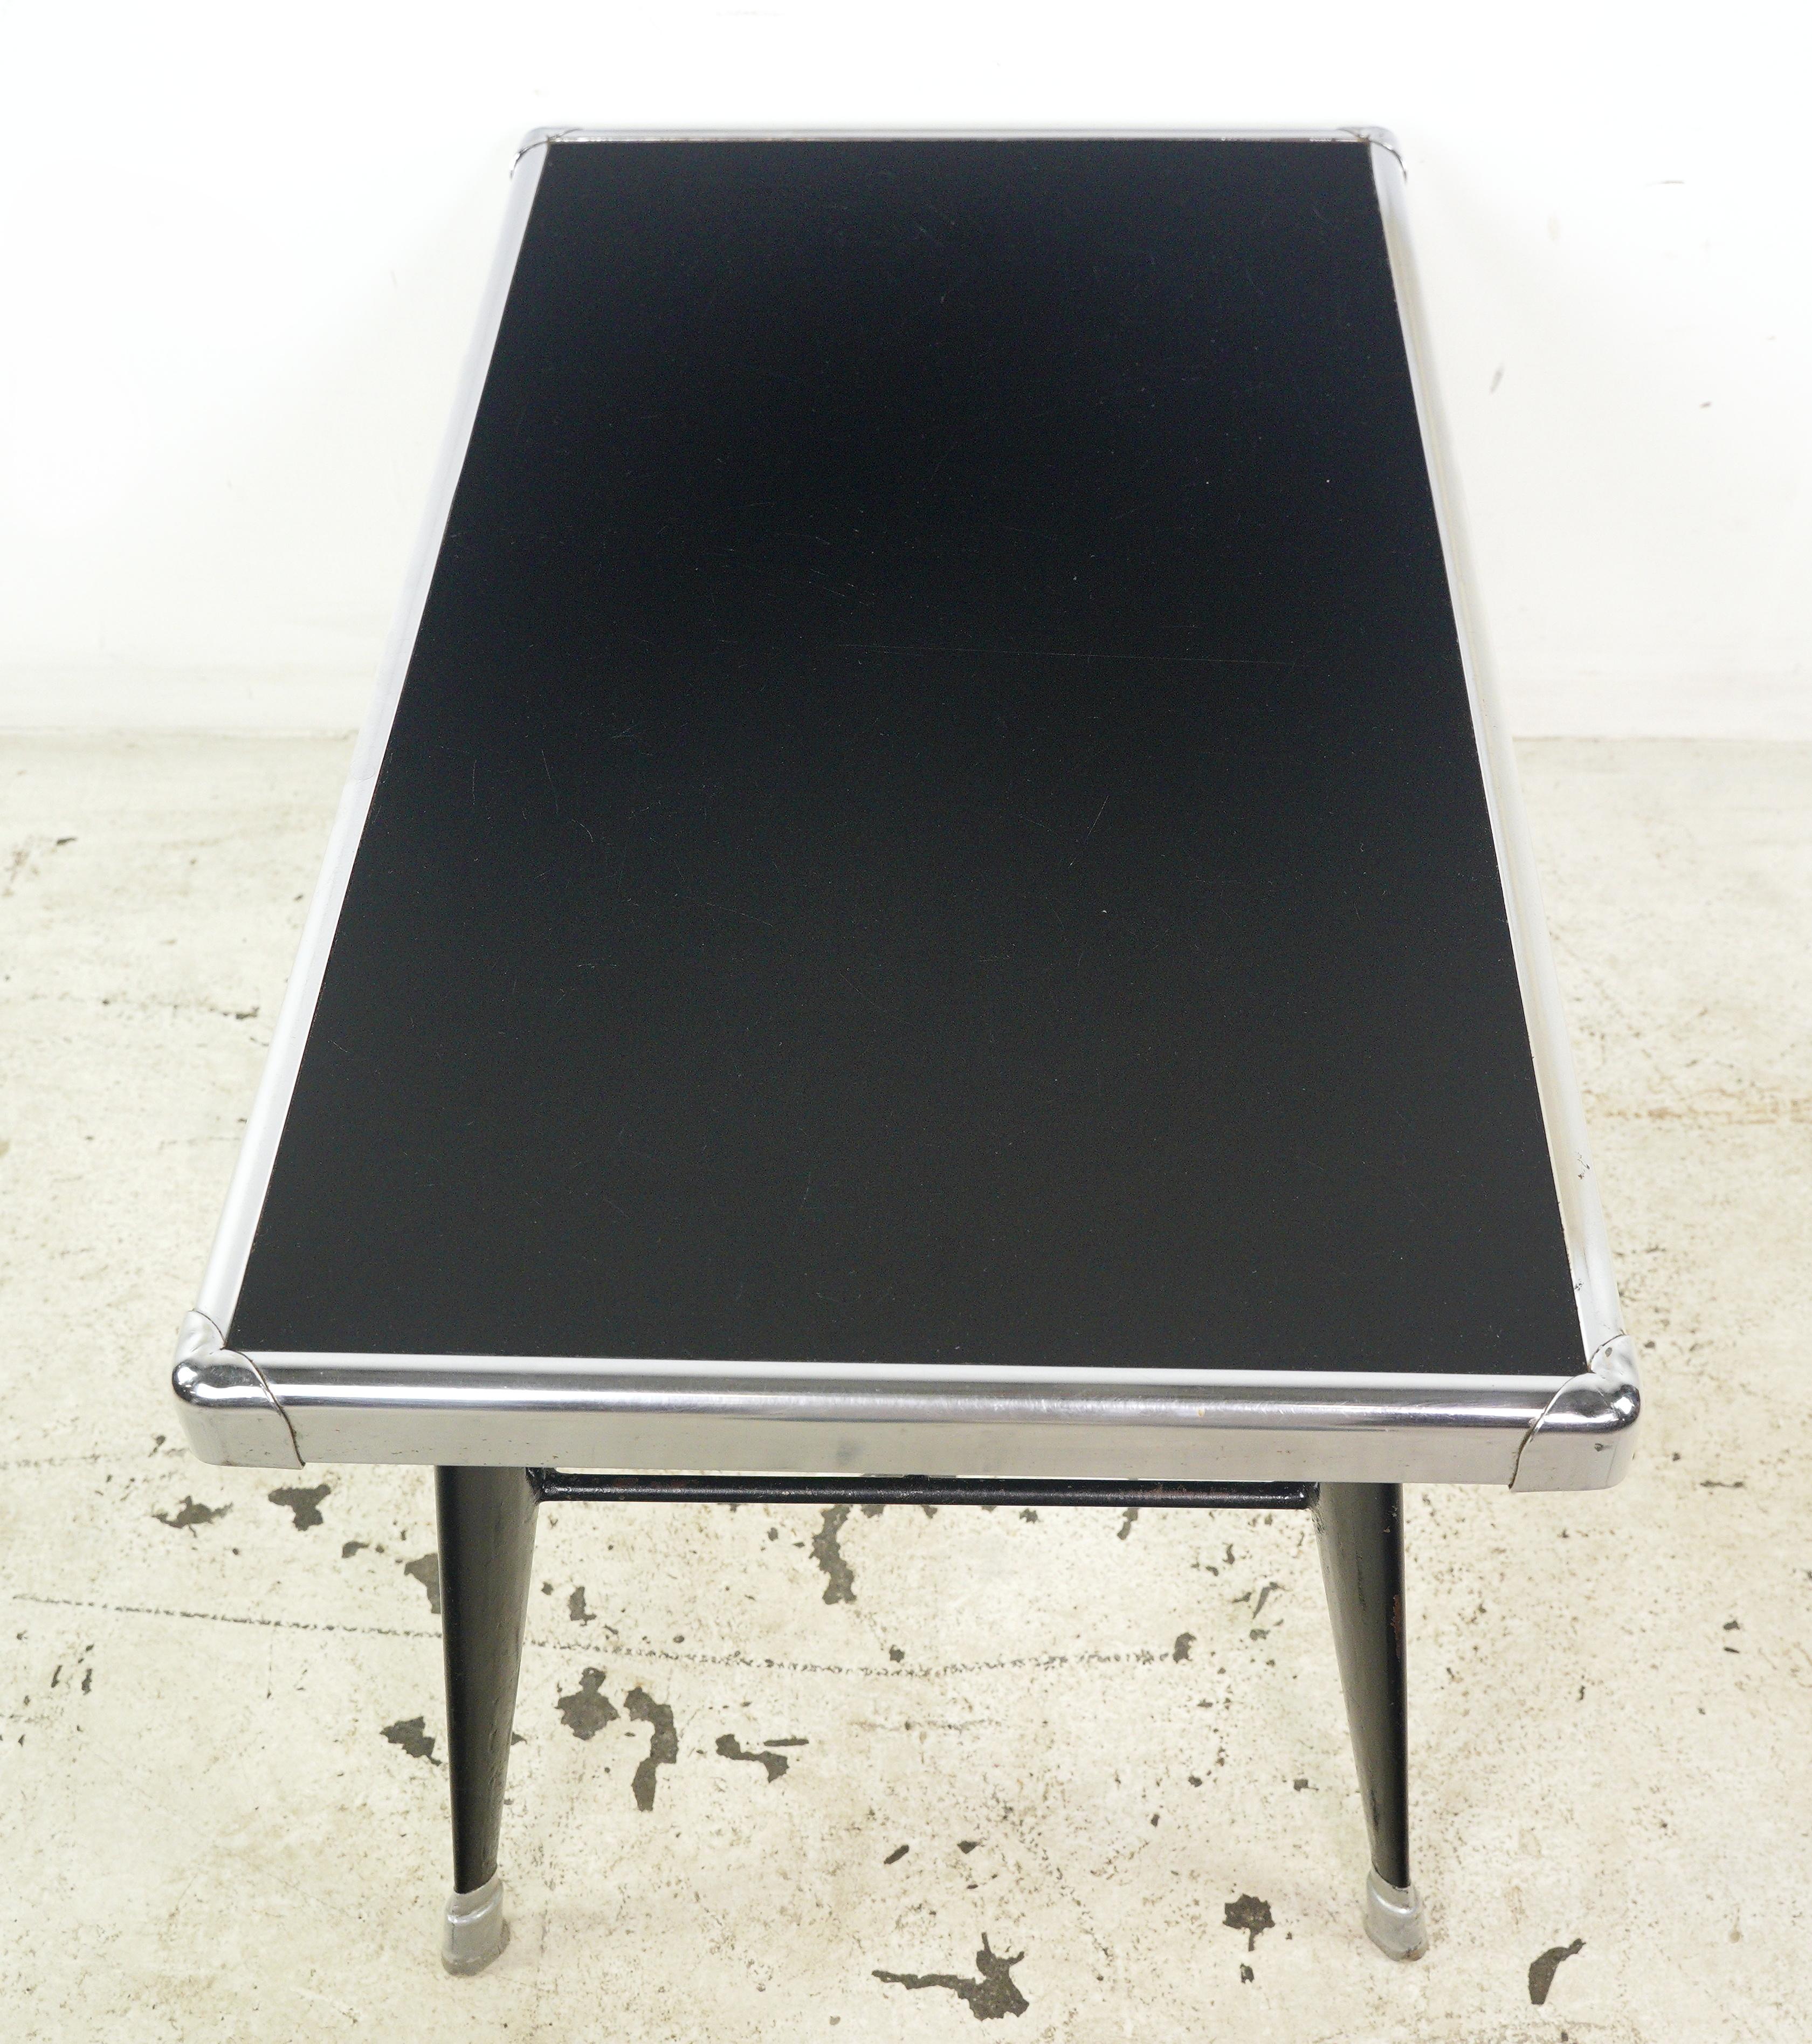 1950s Mid-Century Modern Black Glass & Steel Coffee Table For Sale 5